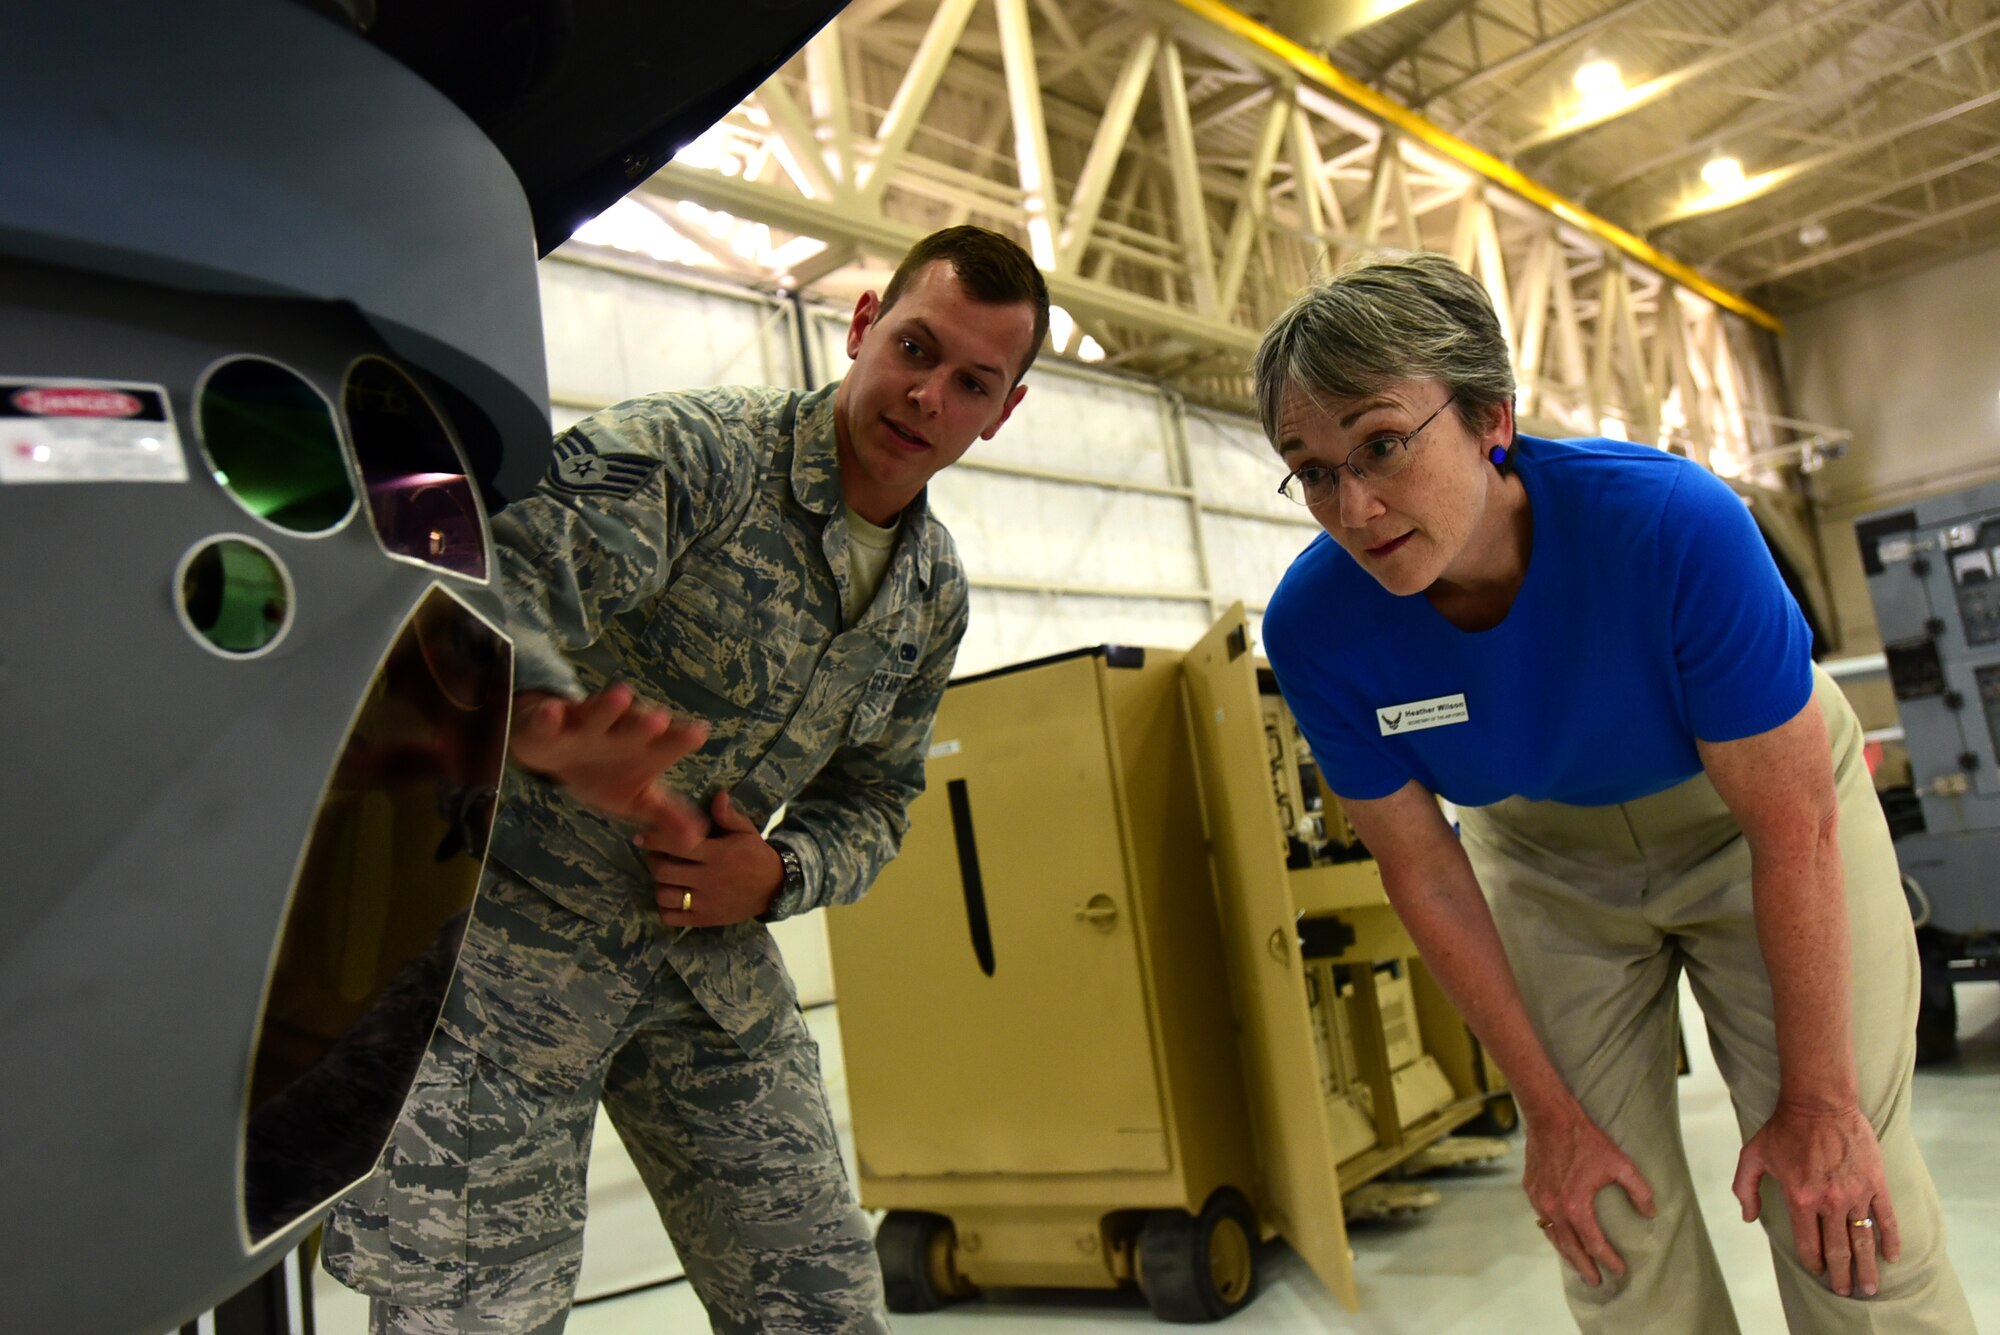 Secretary of the Air Force Heather Wilson is briefed on the Multi-Spectral Targeting system by Staff Sgt. Evan, 432nd Aircraft Maintenance Squadron avionics craftsman July 19, 2017, at Creech Air Force Base, Nev. During her visit, Wilson was briefed on the specifics on the current MQ-1 Predator and MQ-9 Reaper fleet as the missions they enable for the joint force commanders. (U.S. Air Force photo/Senior Airman Christian Clausen)